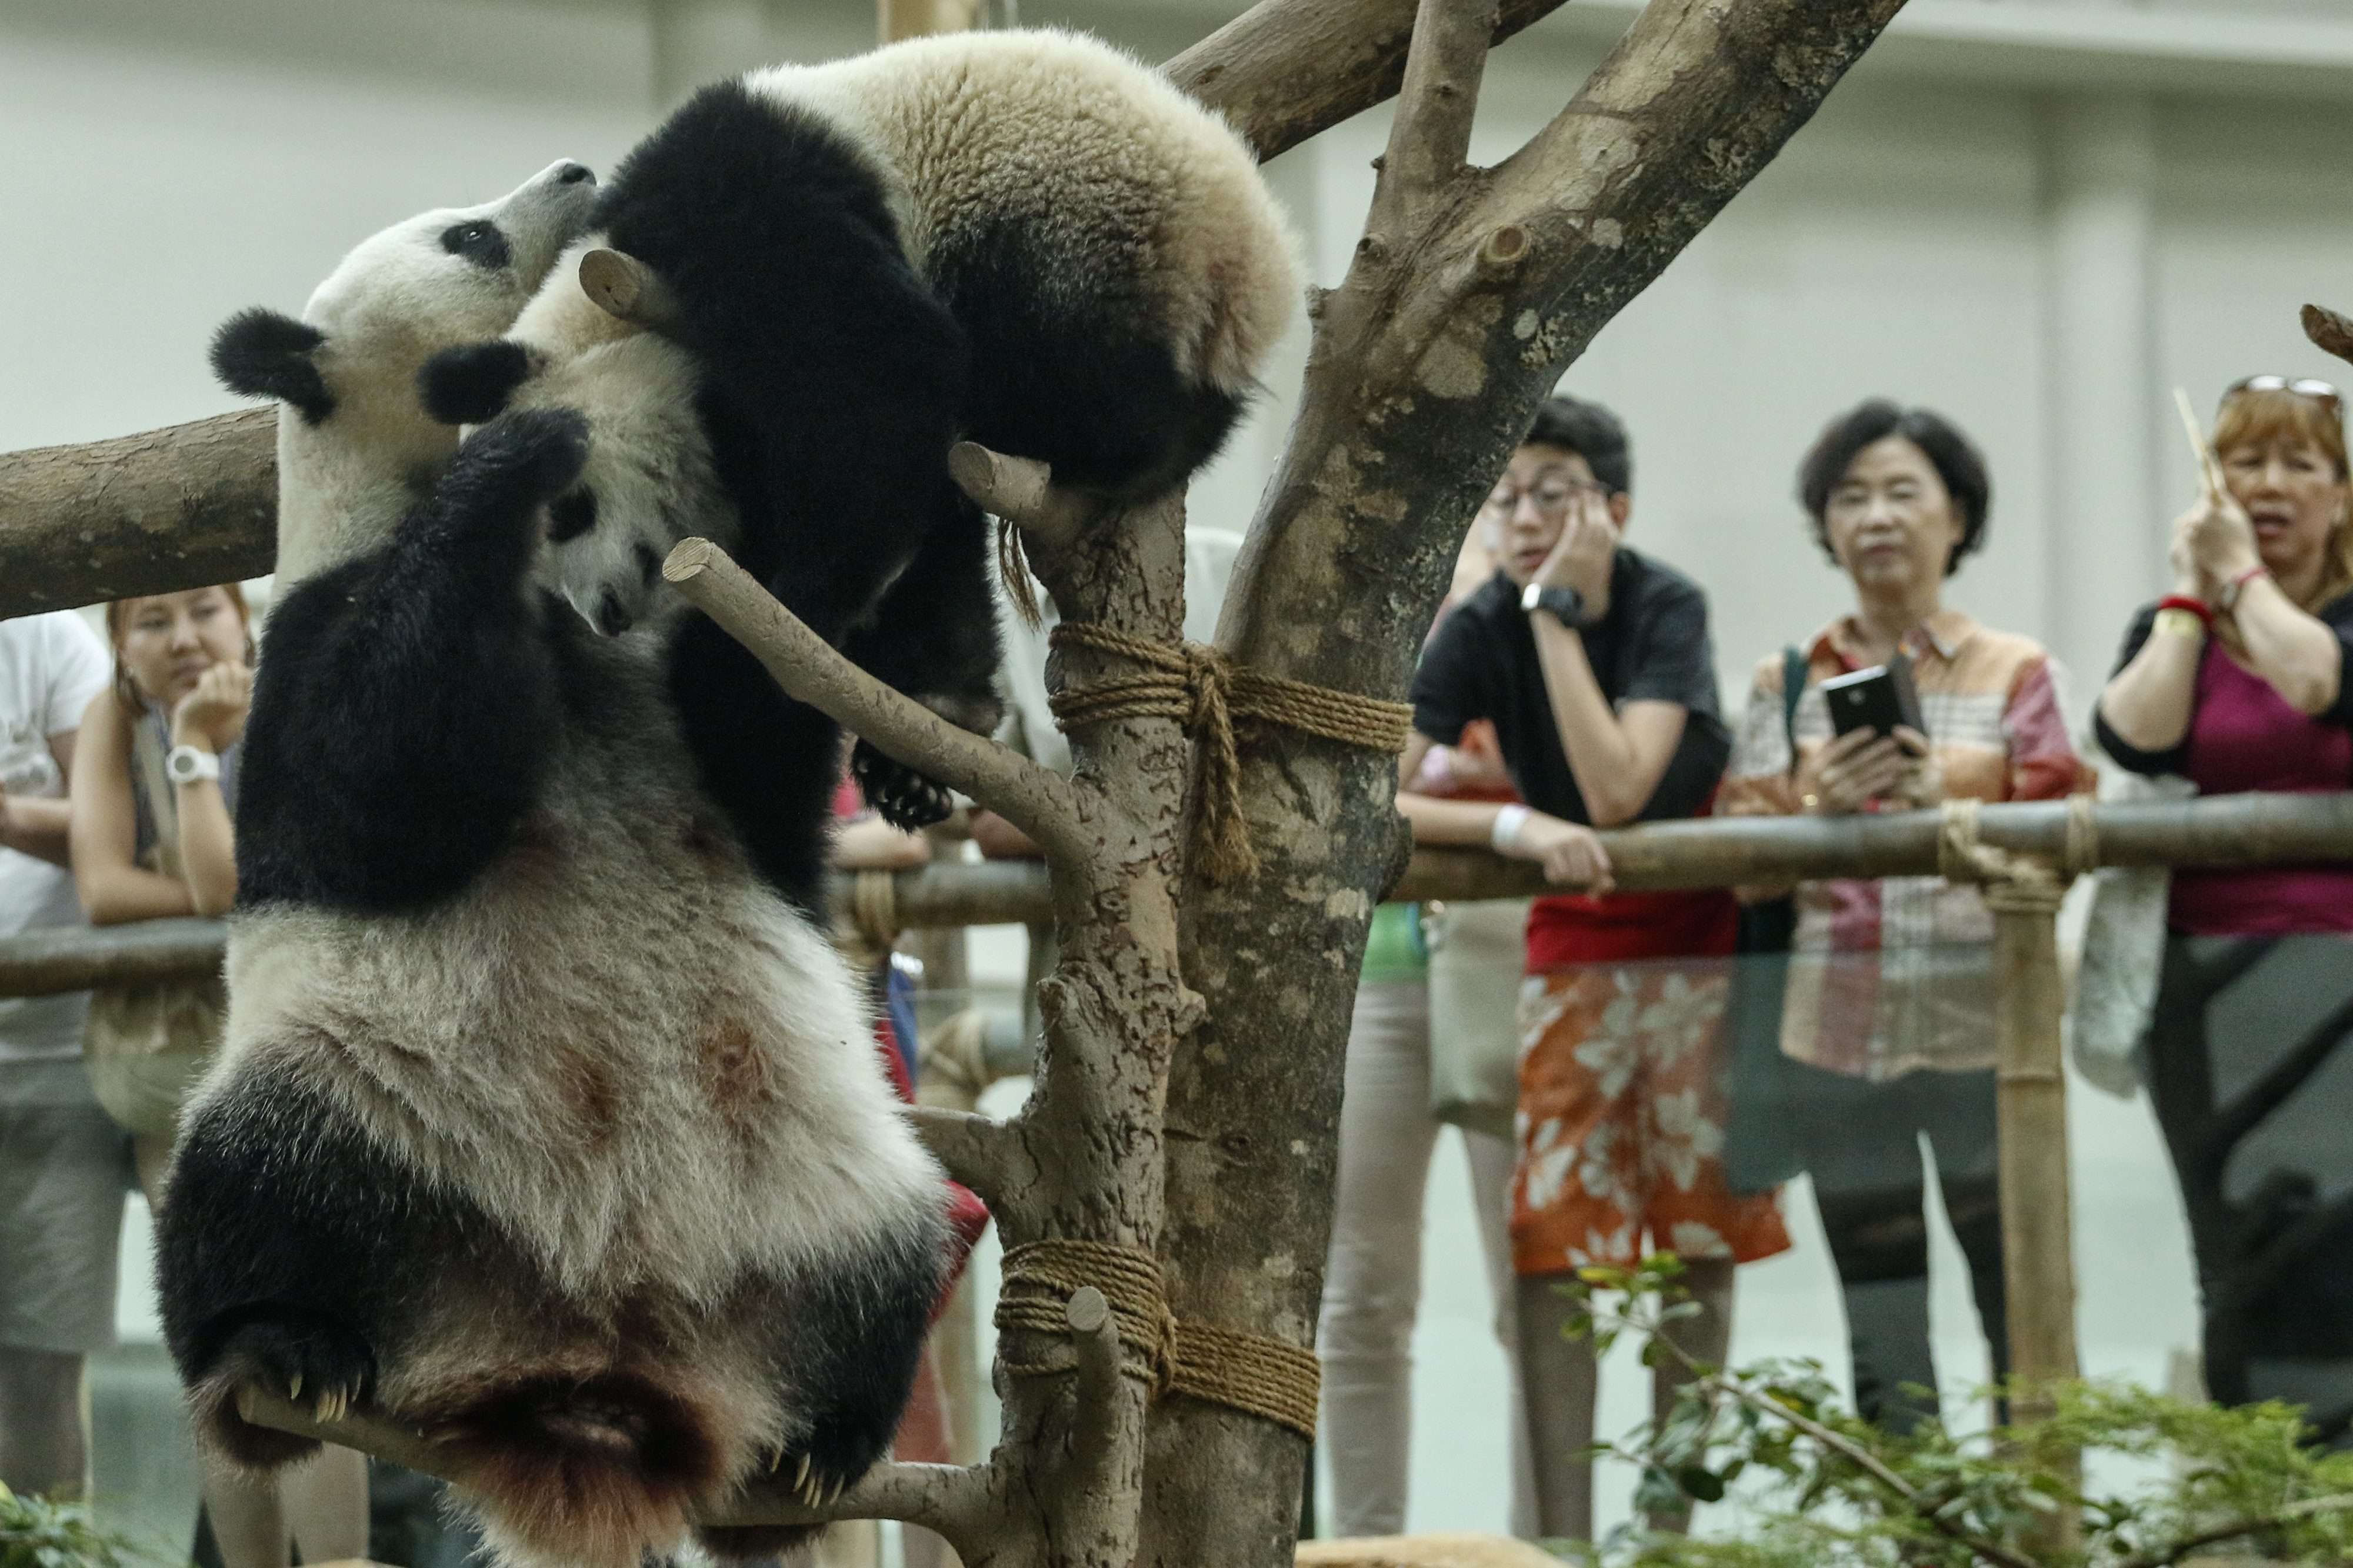 Visitors watch a mother and daughter pair of pandas play at the Malaysian zoo in Kuala Lumpur. The pandas are on loan from China to celebrate bilateral ties. Photo: EPA